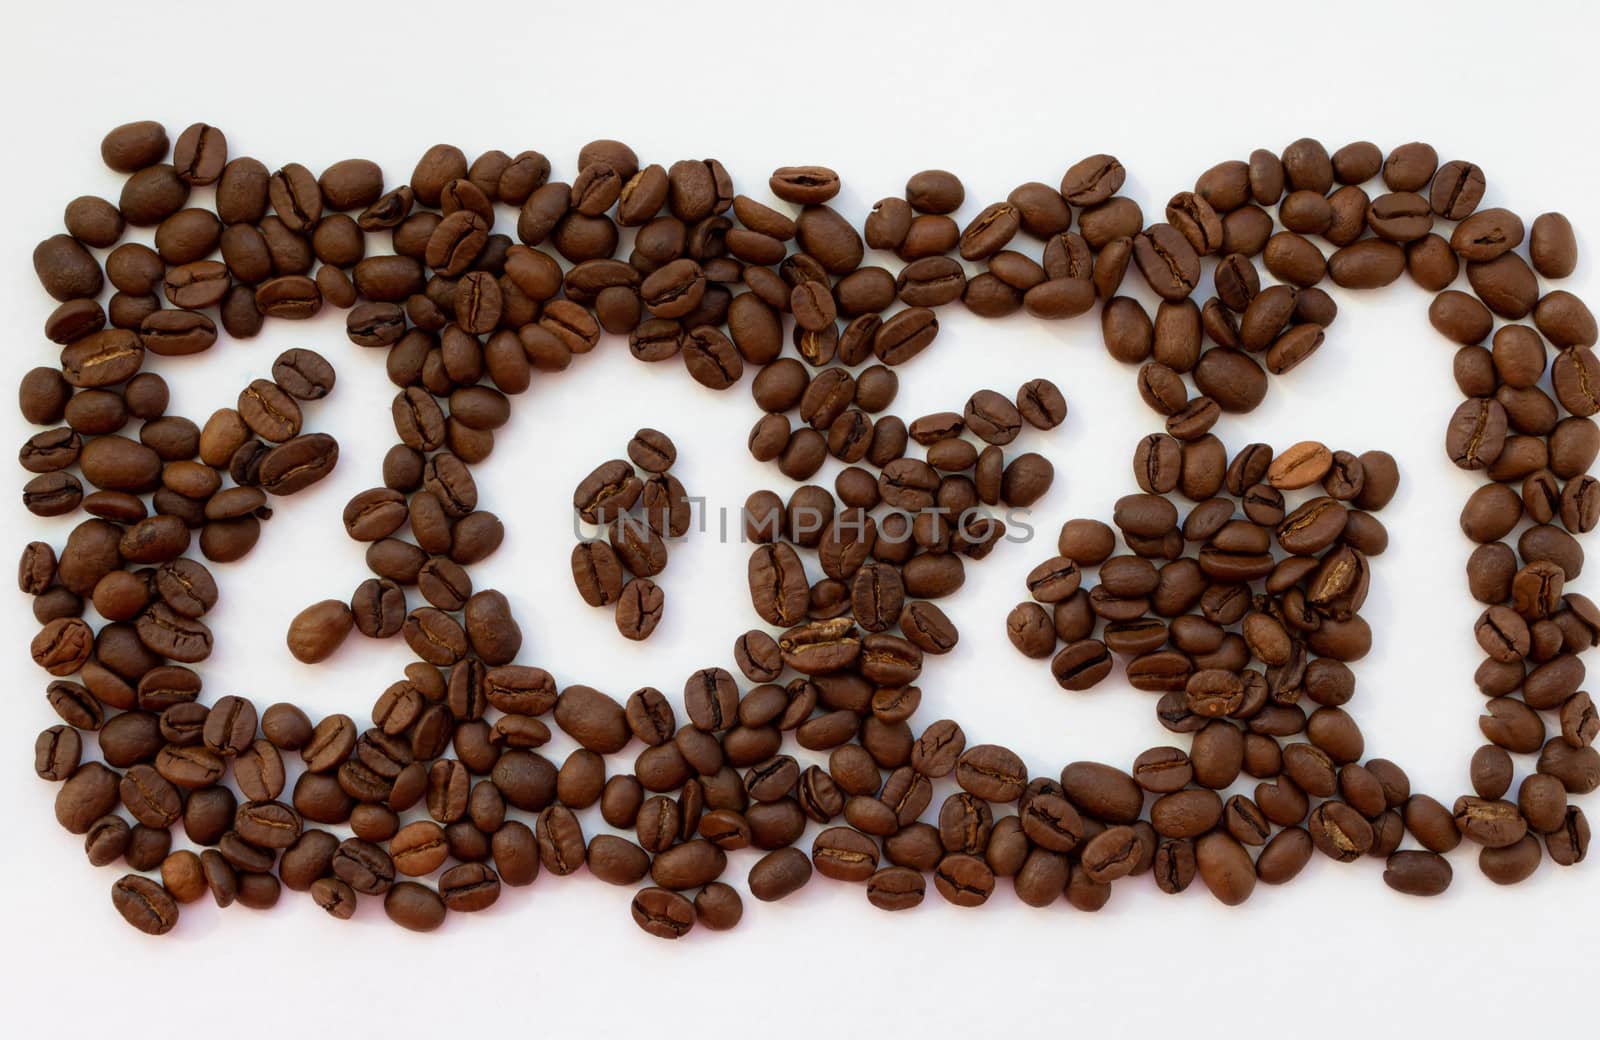 The number 2021 in coffee beans isolated on a white background.The concept of the new year by lapushka62